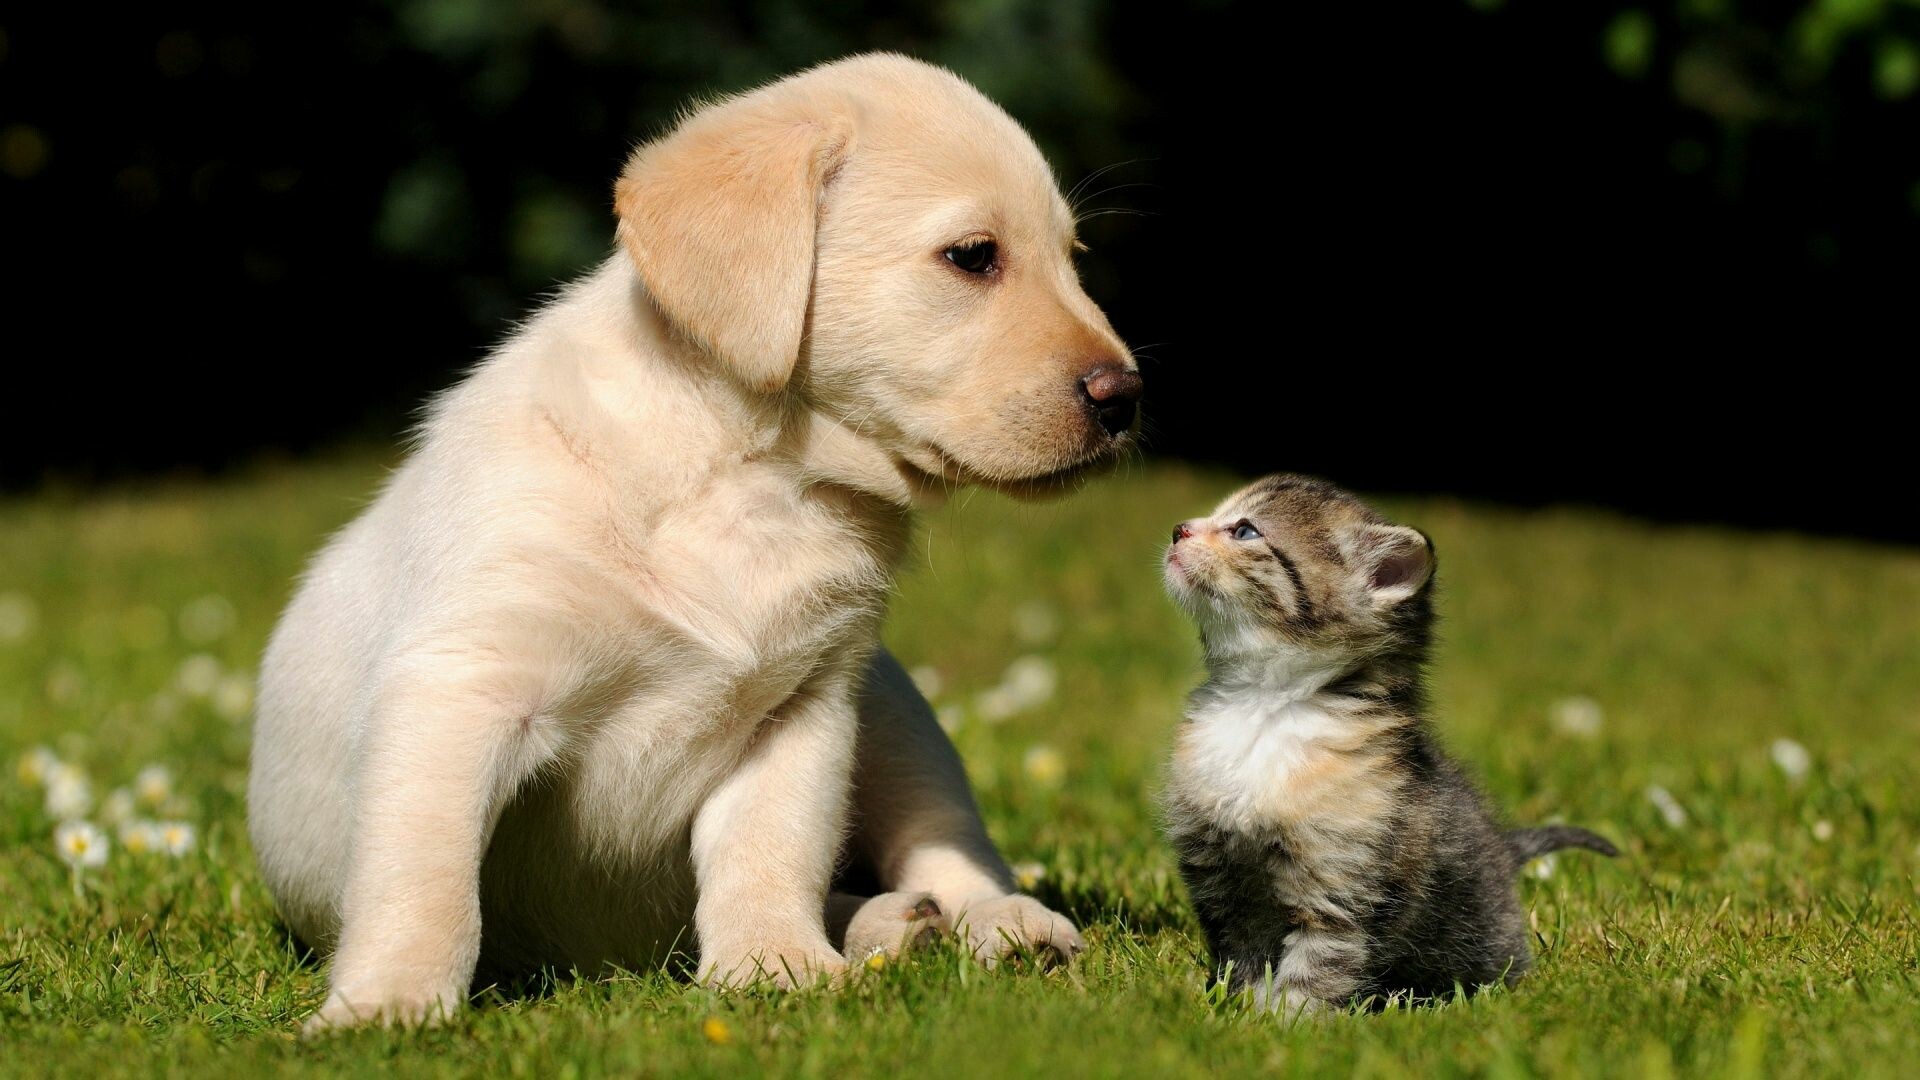 Puppy: Most popular domestic animals in the world. 1920x1080 Full HD Wallpaper.